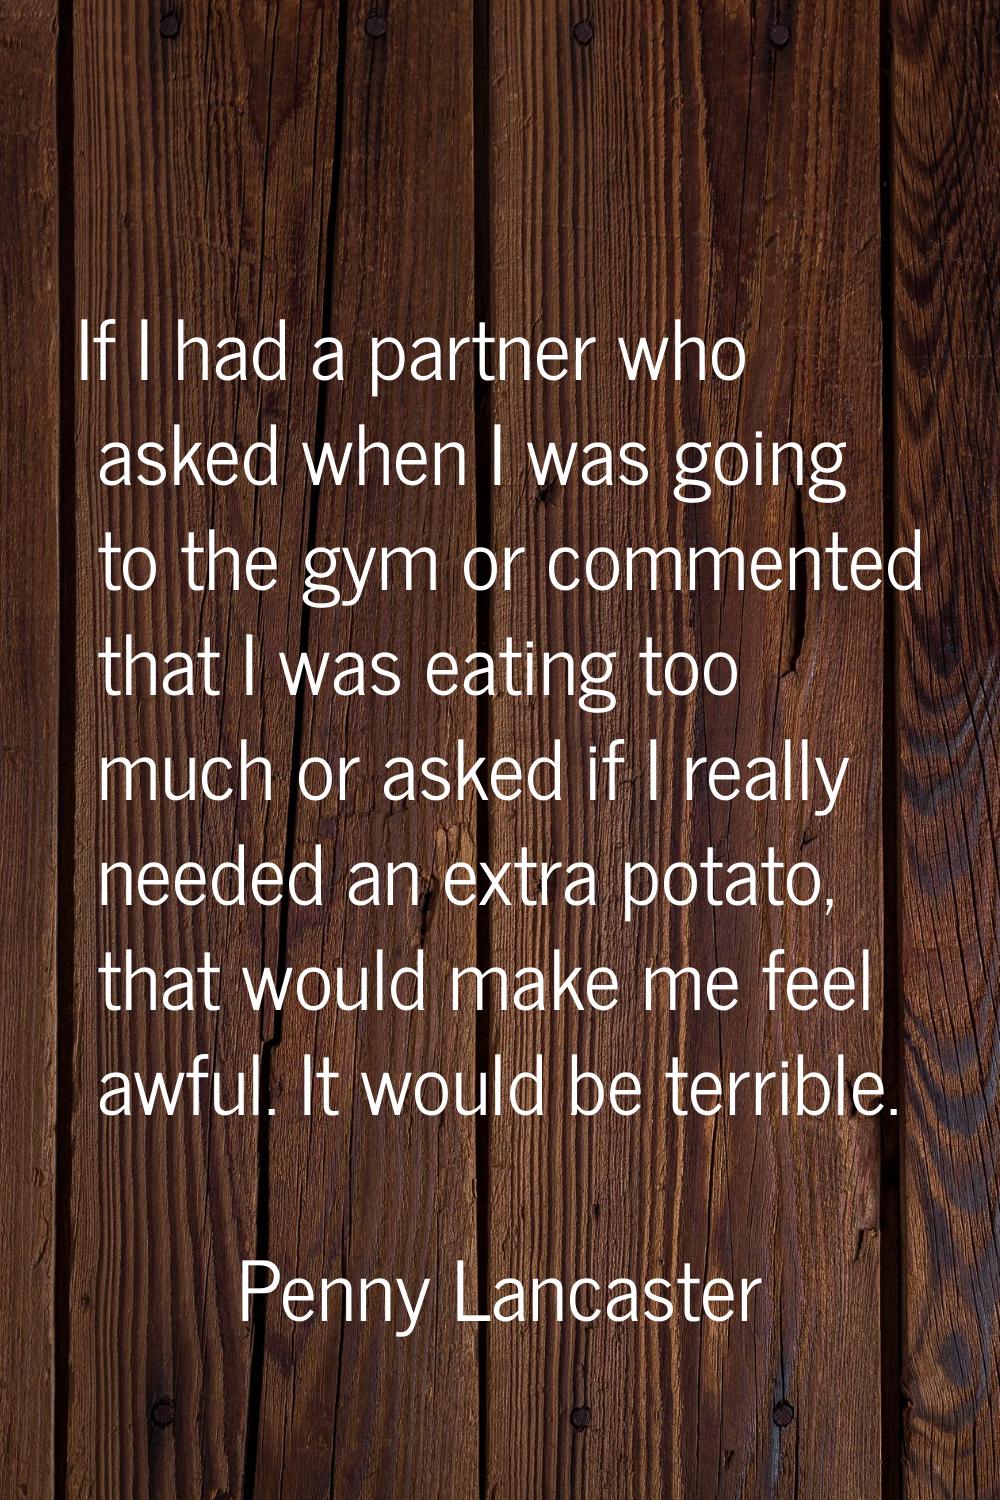 If I had a partner who asked when I was going to the gym or commented that I was eating too much or